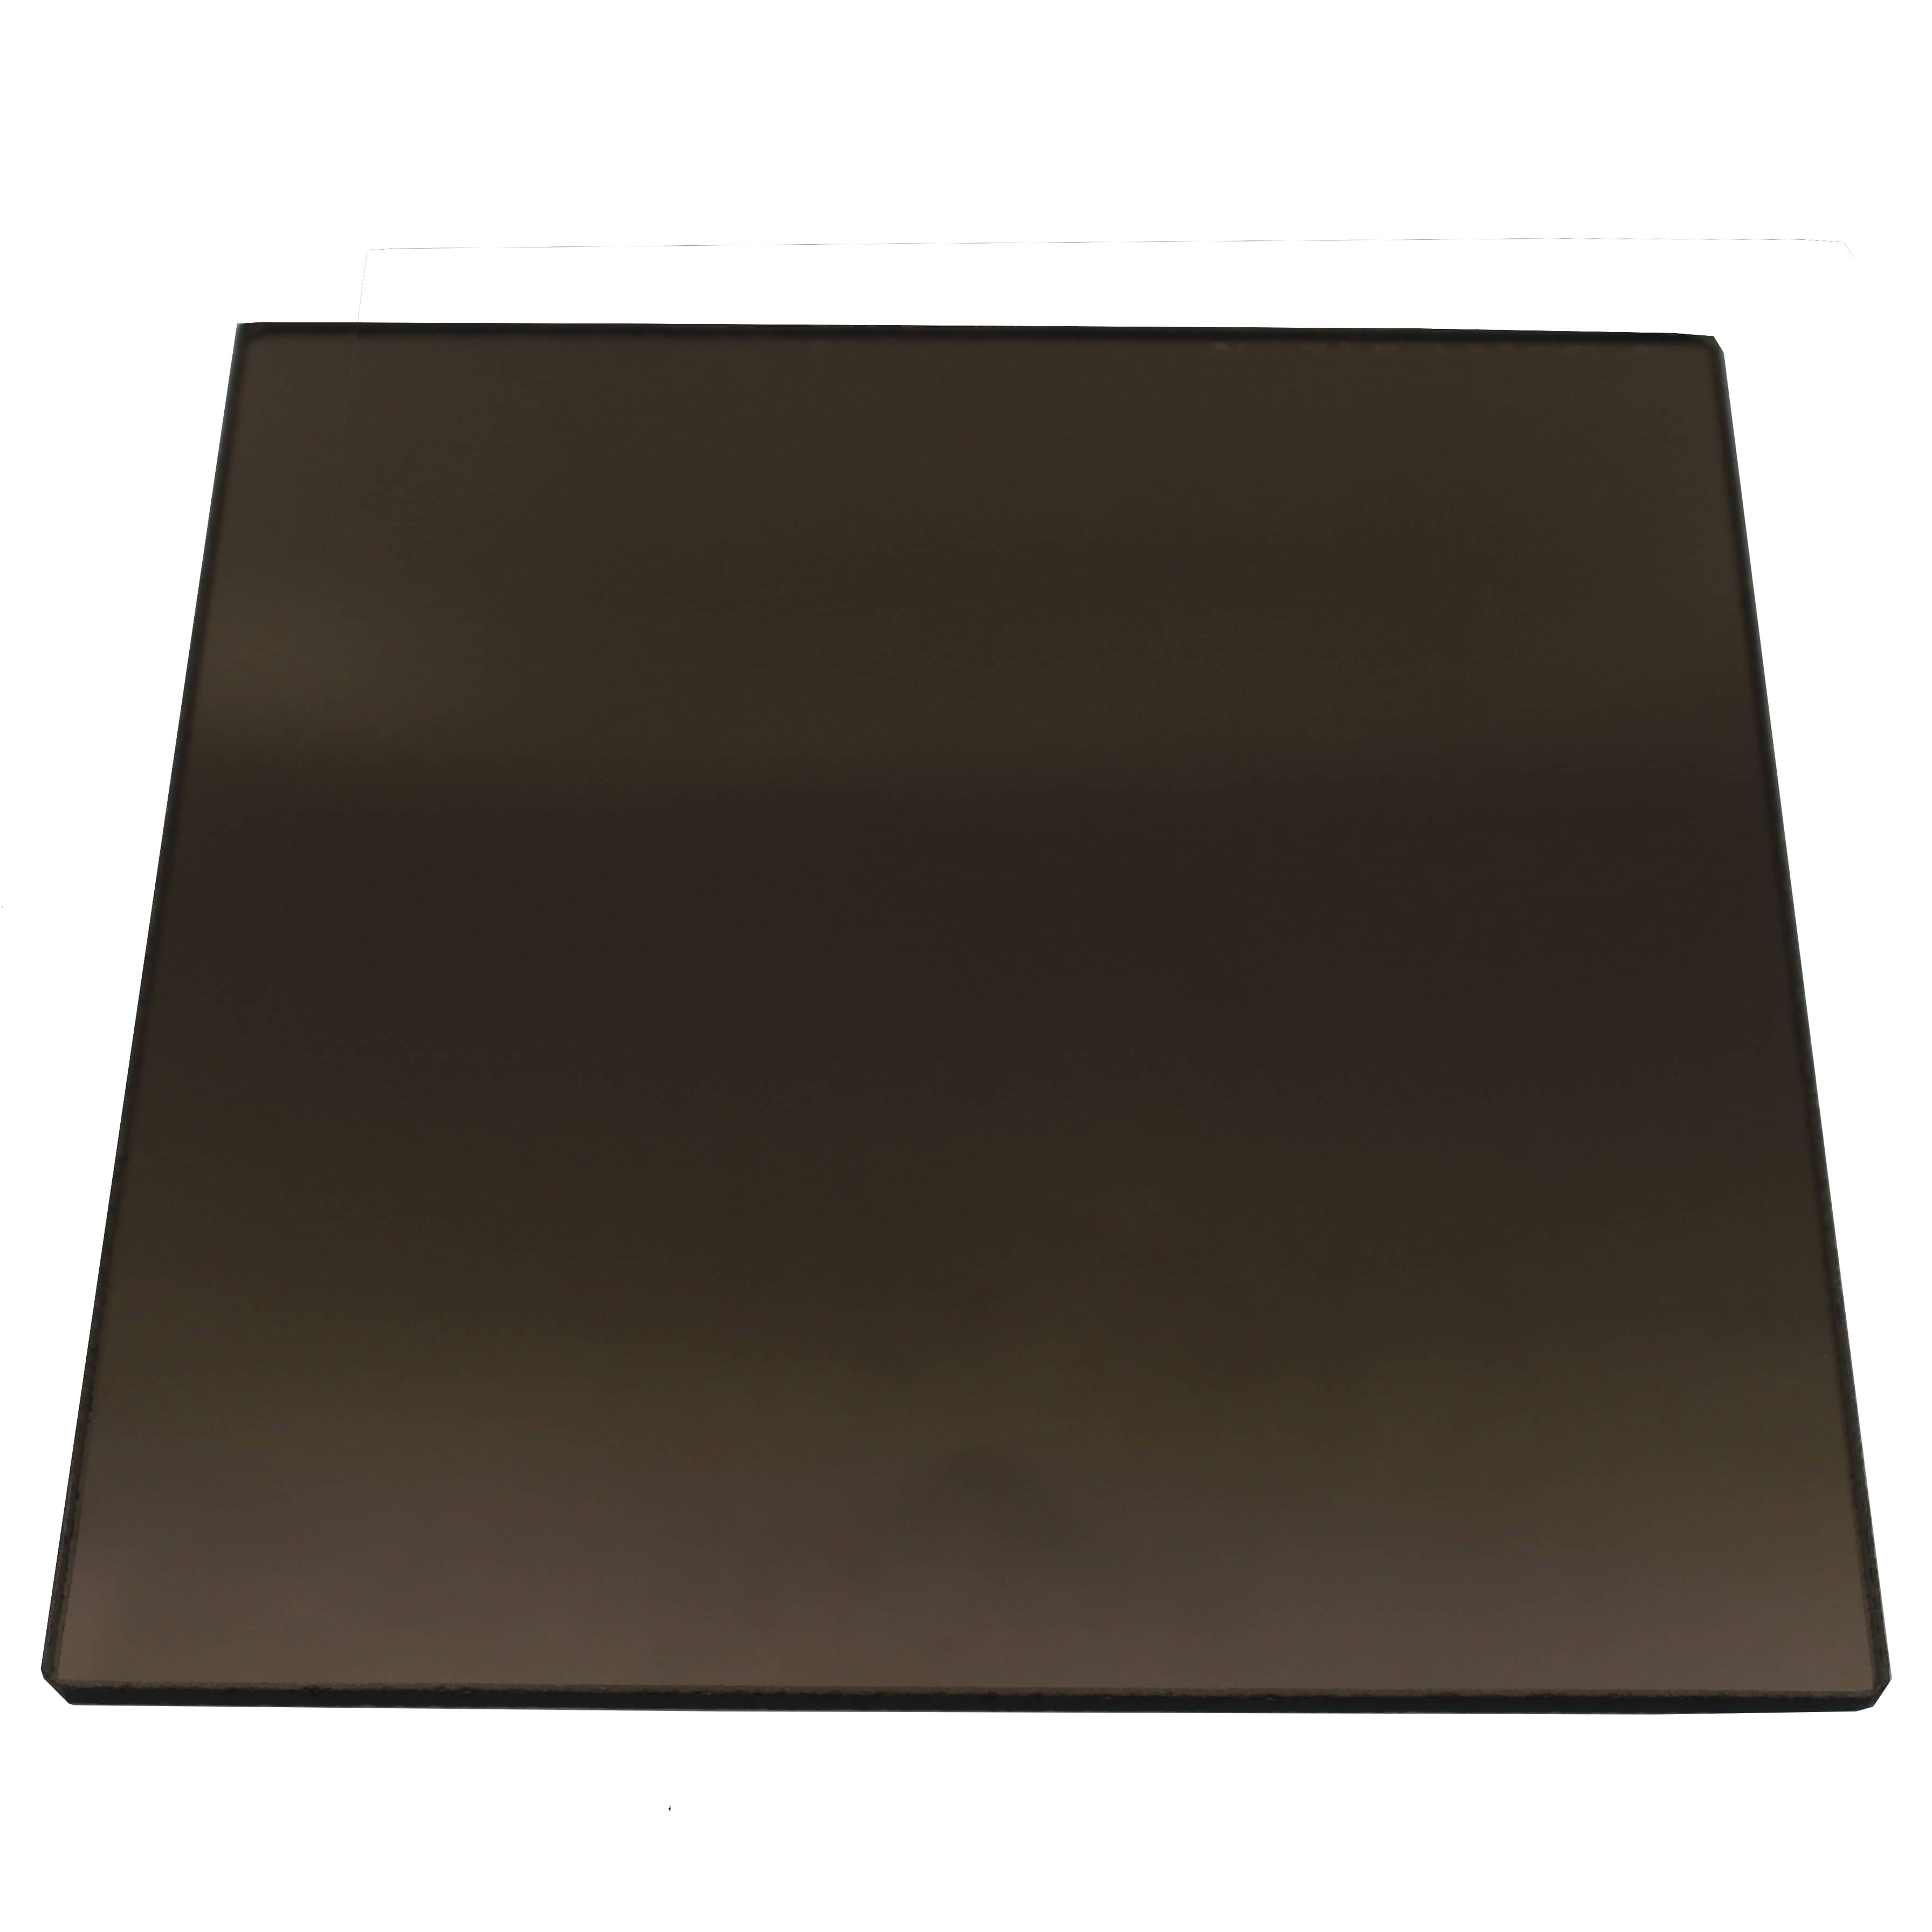 Buy 5mm euro bronze mirror Online | Manufacturing Glass and Mirrors | Qetaat.com